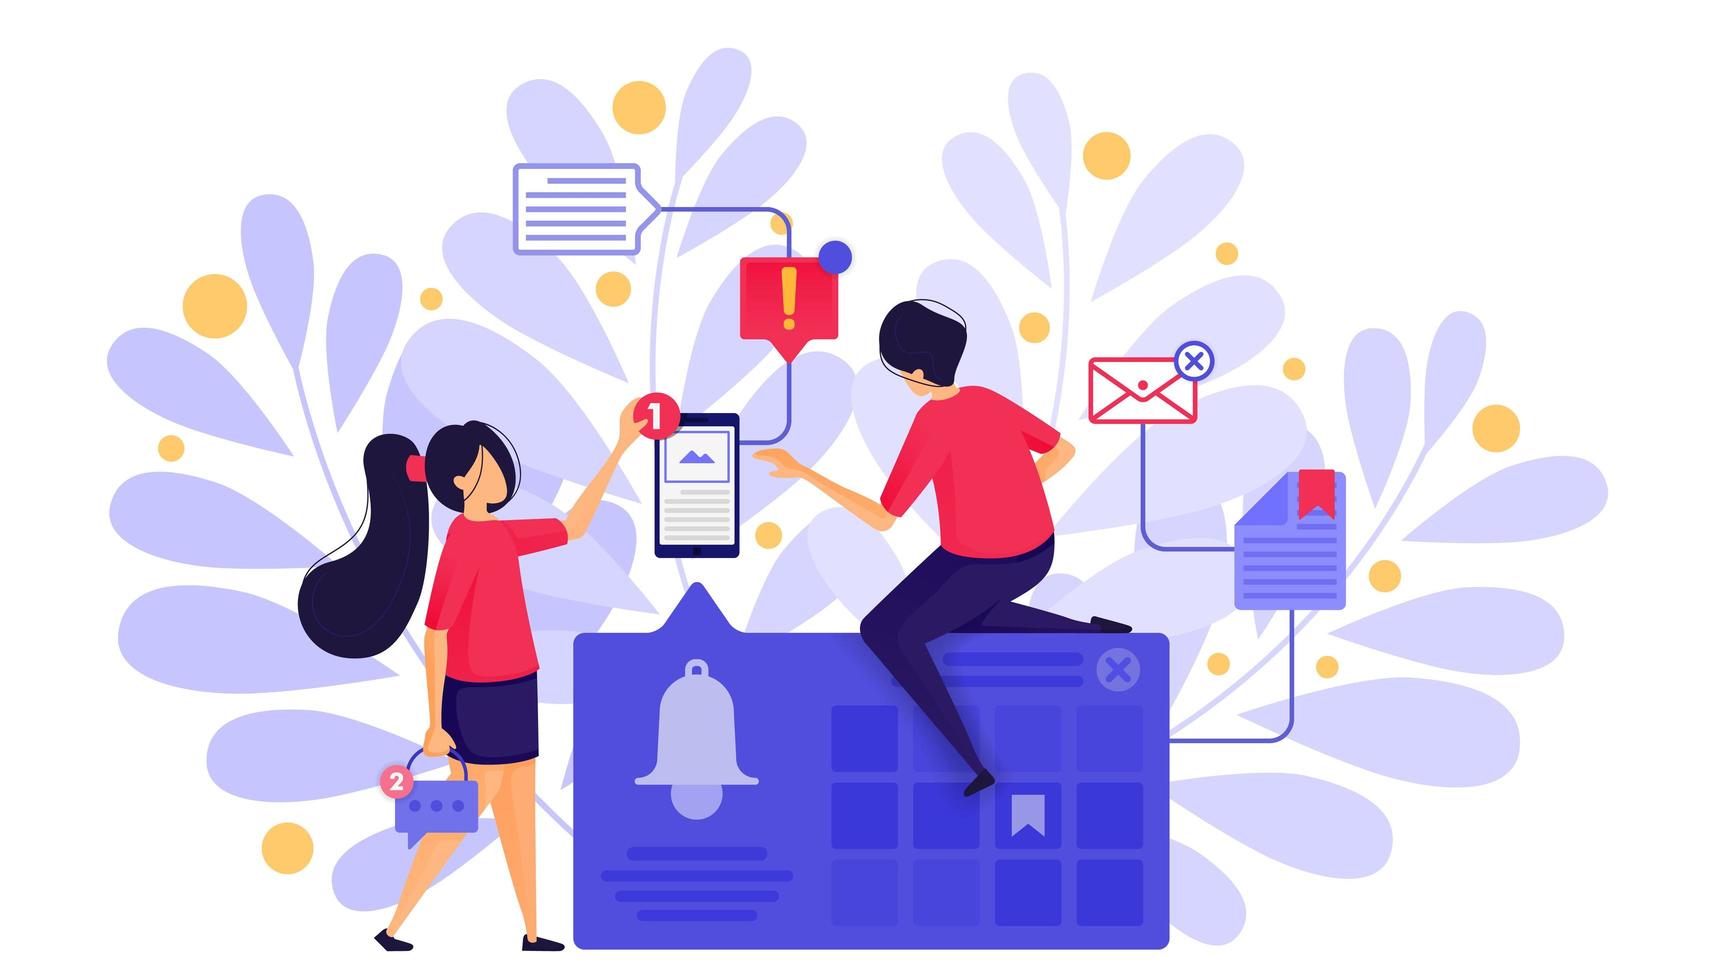 People Set Bell Notifications or Ringing Bell Alarms to Send Messages And Set Schedules With Bookmark in Calendar. Character Concept Vector Illustration For Web Landing Page, Banner, Mobile Apps, Card